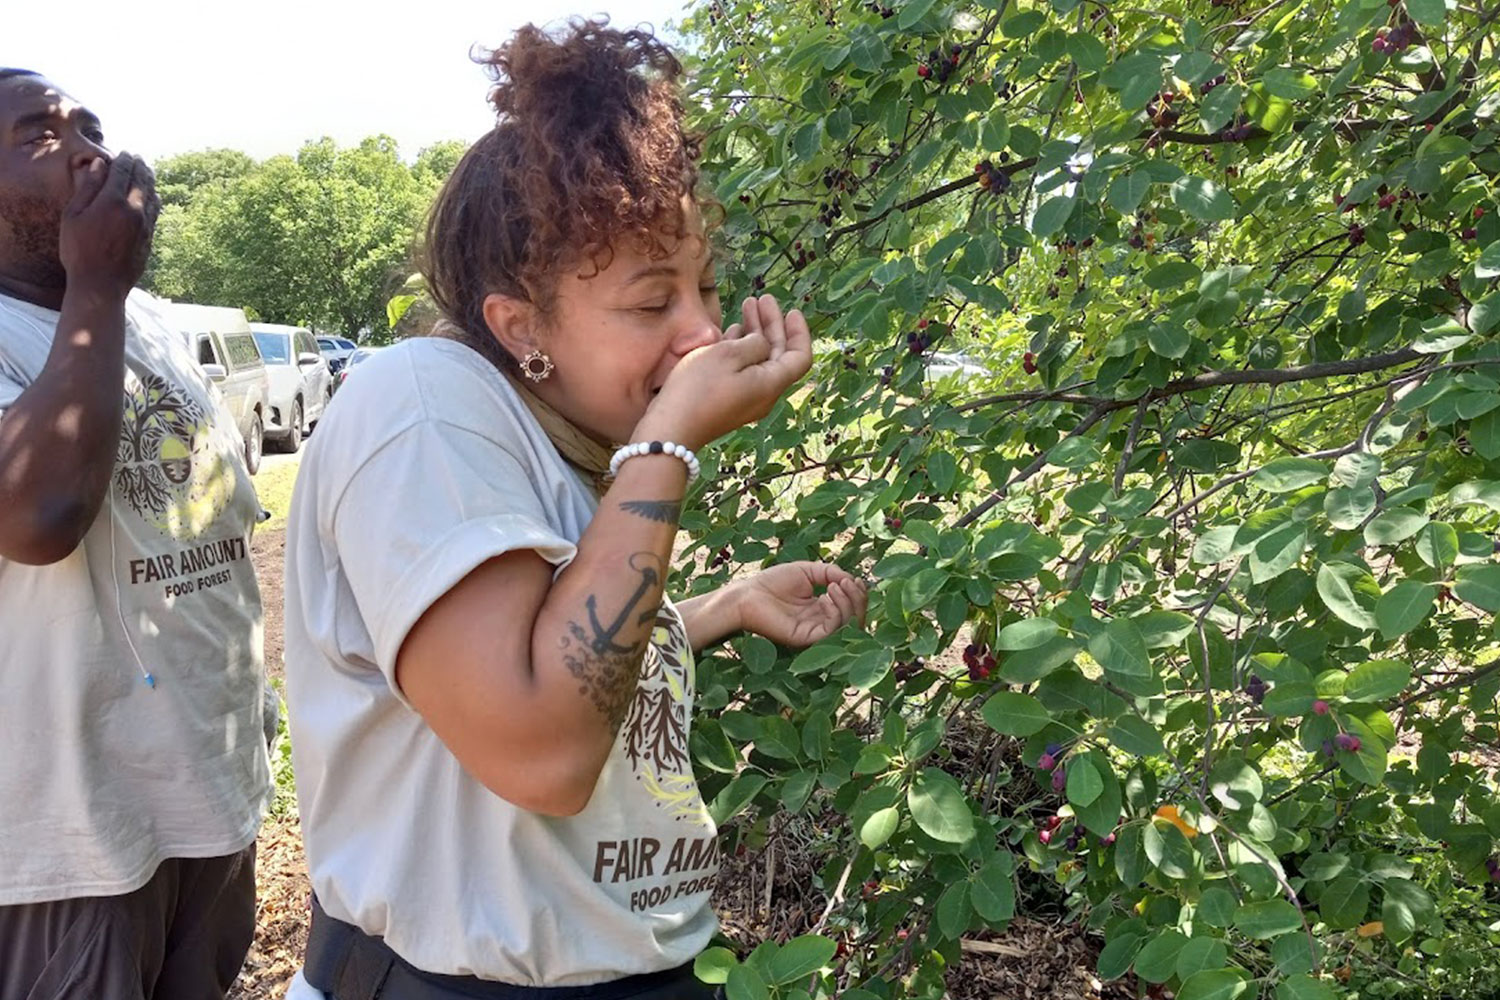 Organizers wearing Fair Amount Food Forest shirts pop serviceberries into their mouths